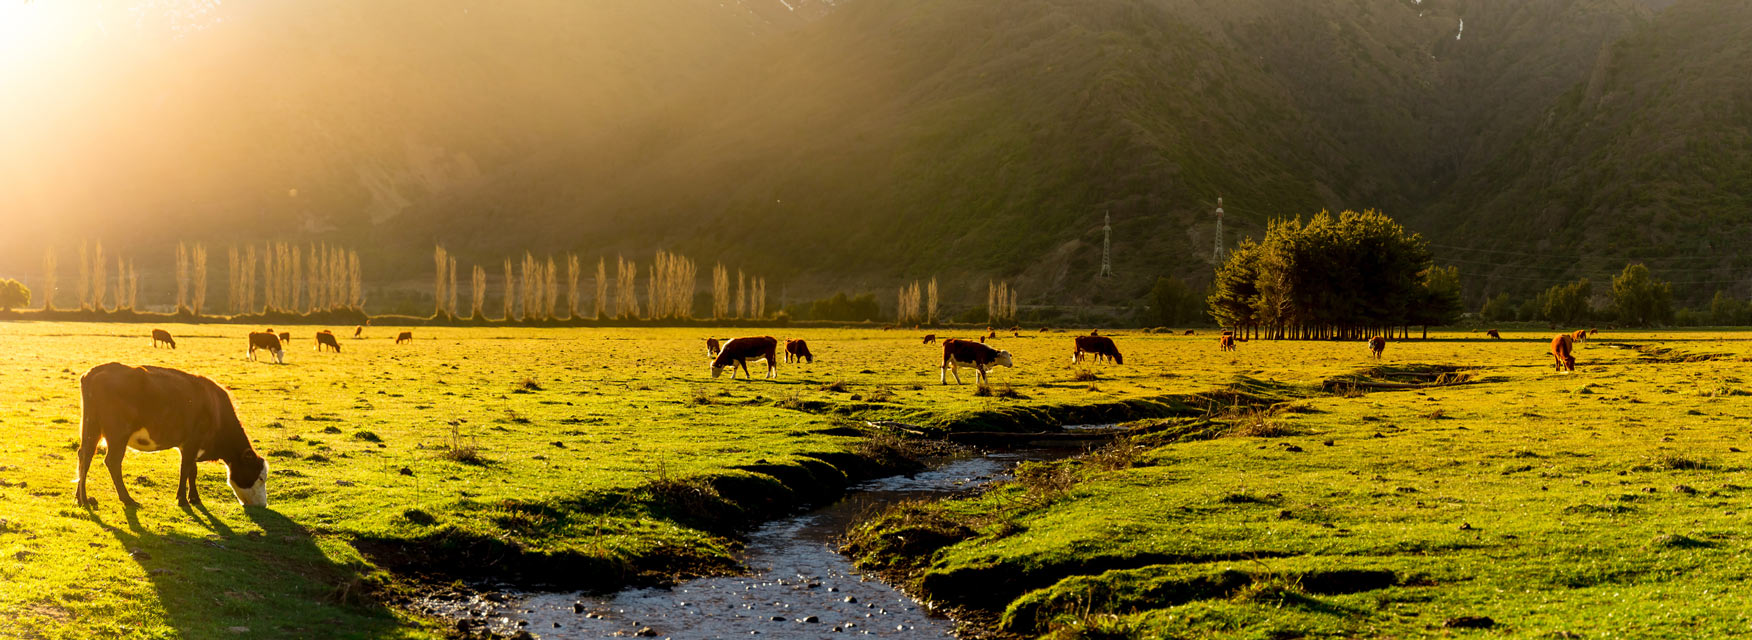 Beef cattle graze grass near a creek with mountains in the background